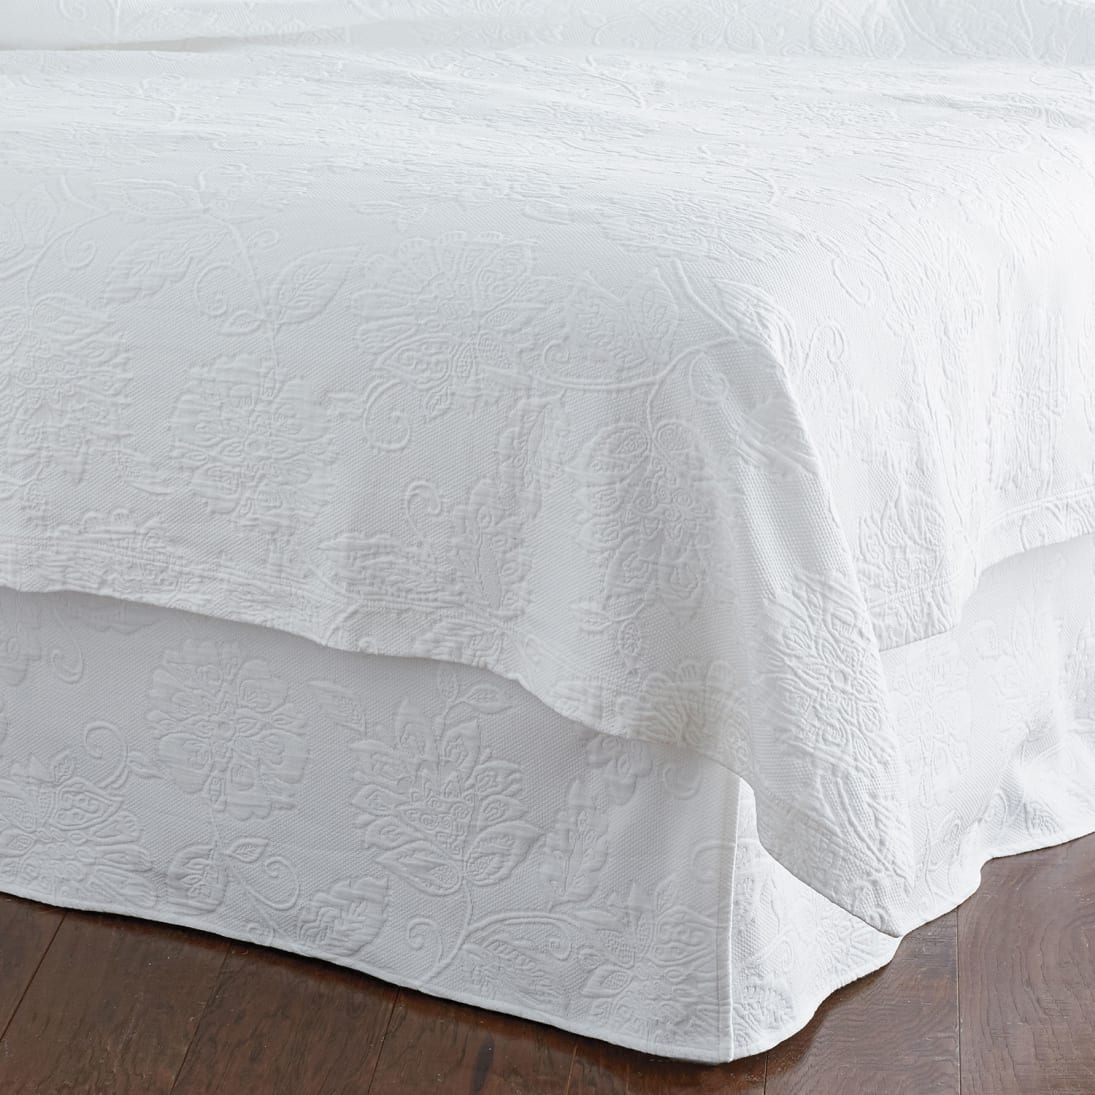 Details about   Putnam Matelasse White Cotton Full Coverlet Bedspread 86 X 90” New